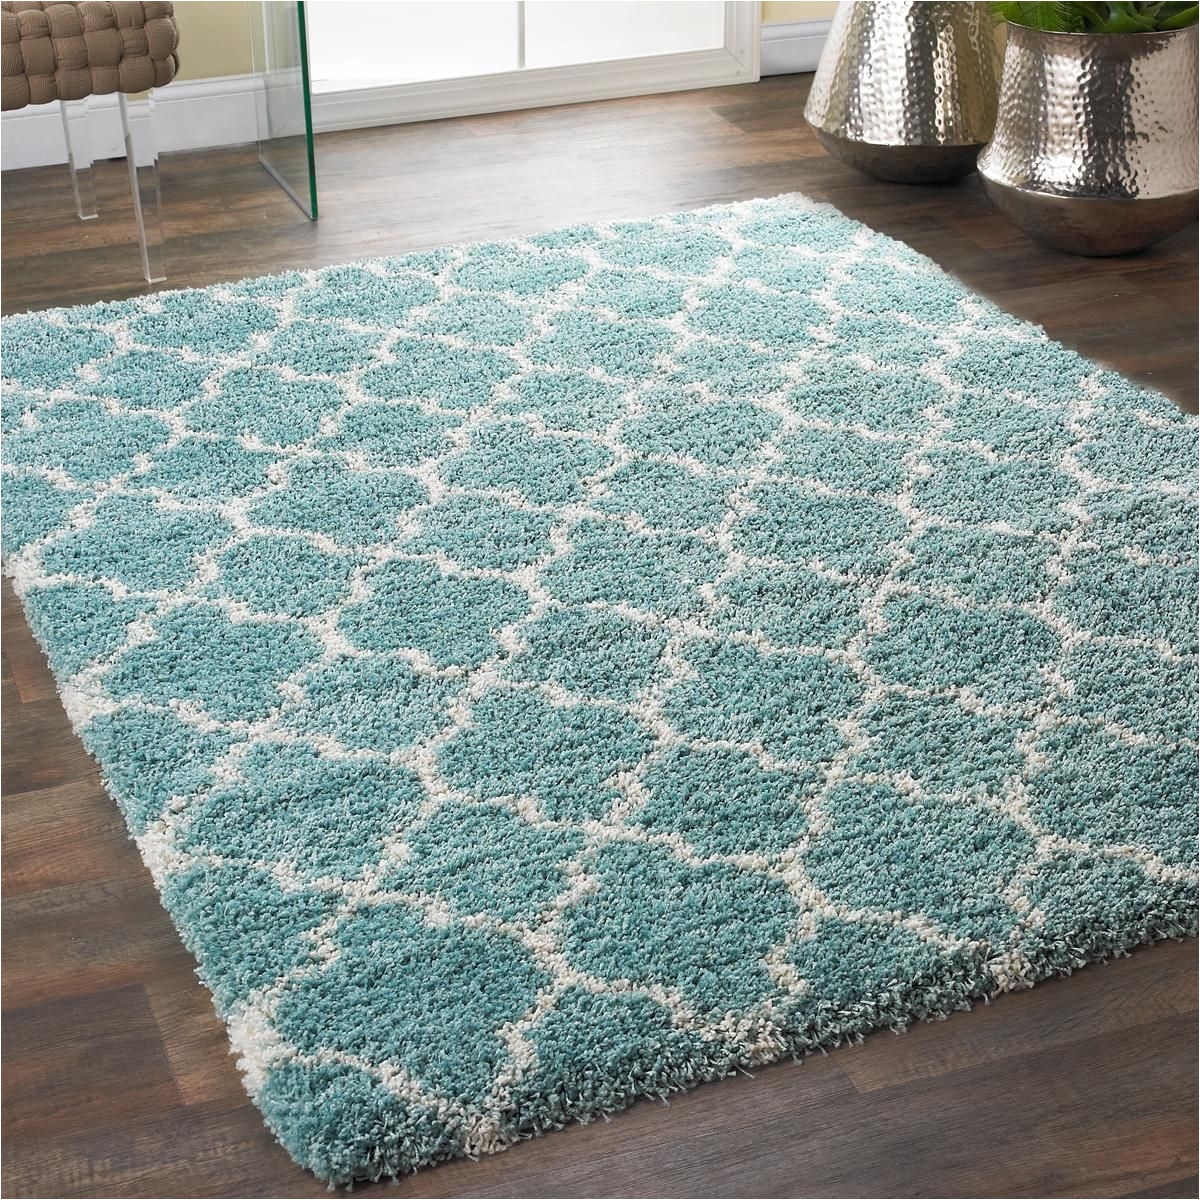 lofty trellis plush area rug sink your toes into this plush rug and enjoy the softness underfoot with eye catching style from a classic trellis pattern in a